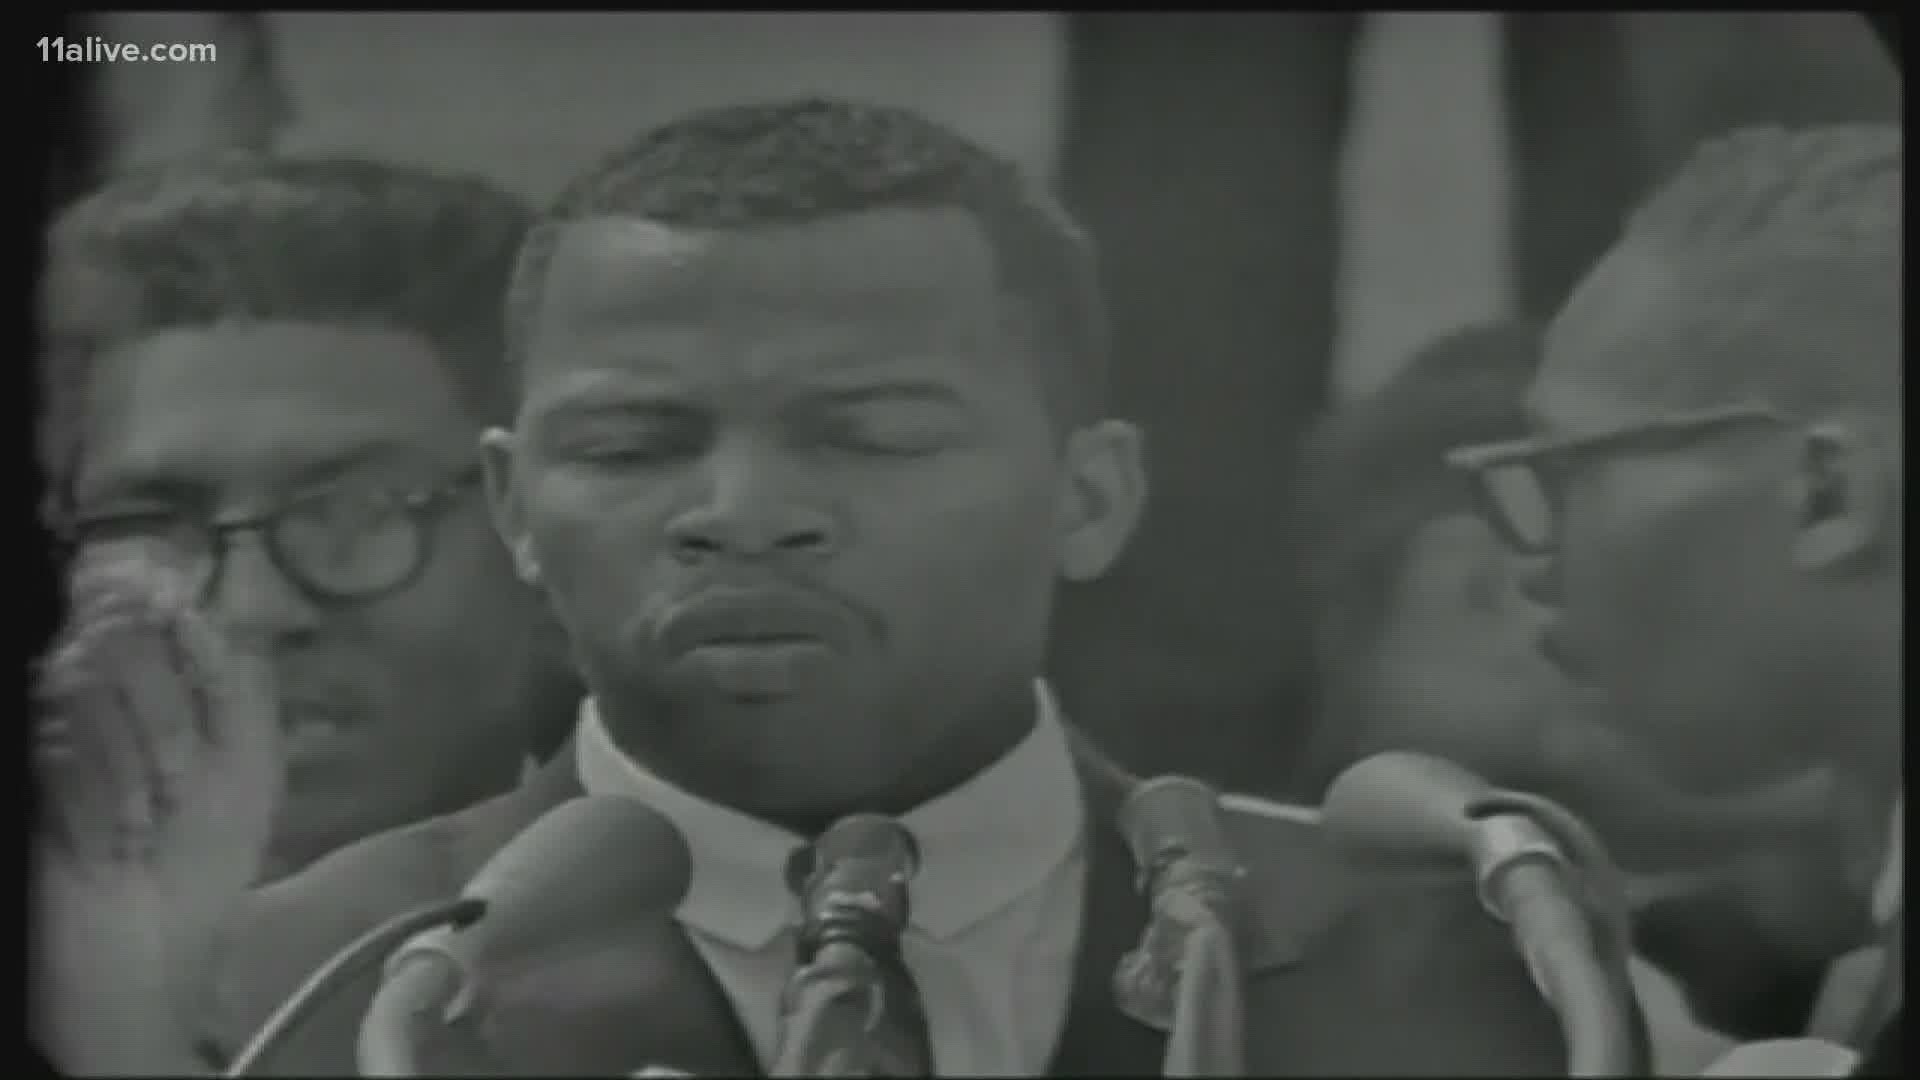 Rep. John Lewis, maker of ‘good trouble,’ had died. 11Alive's Jon Shirek remembers him in this tribute.